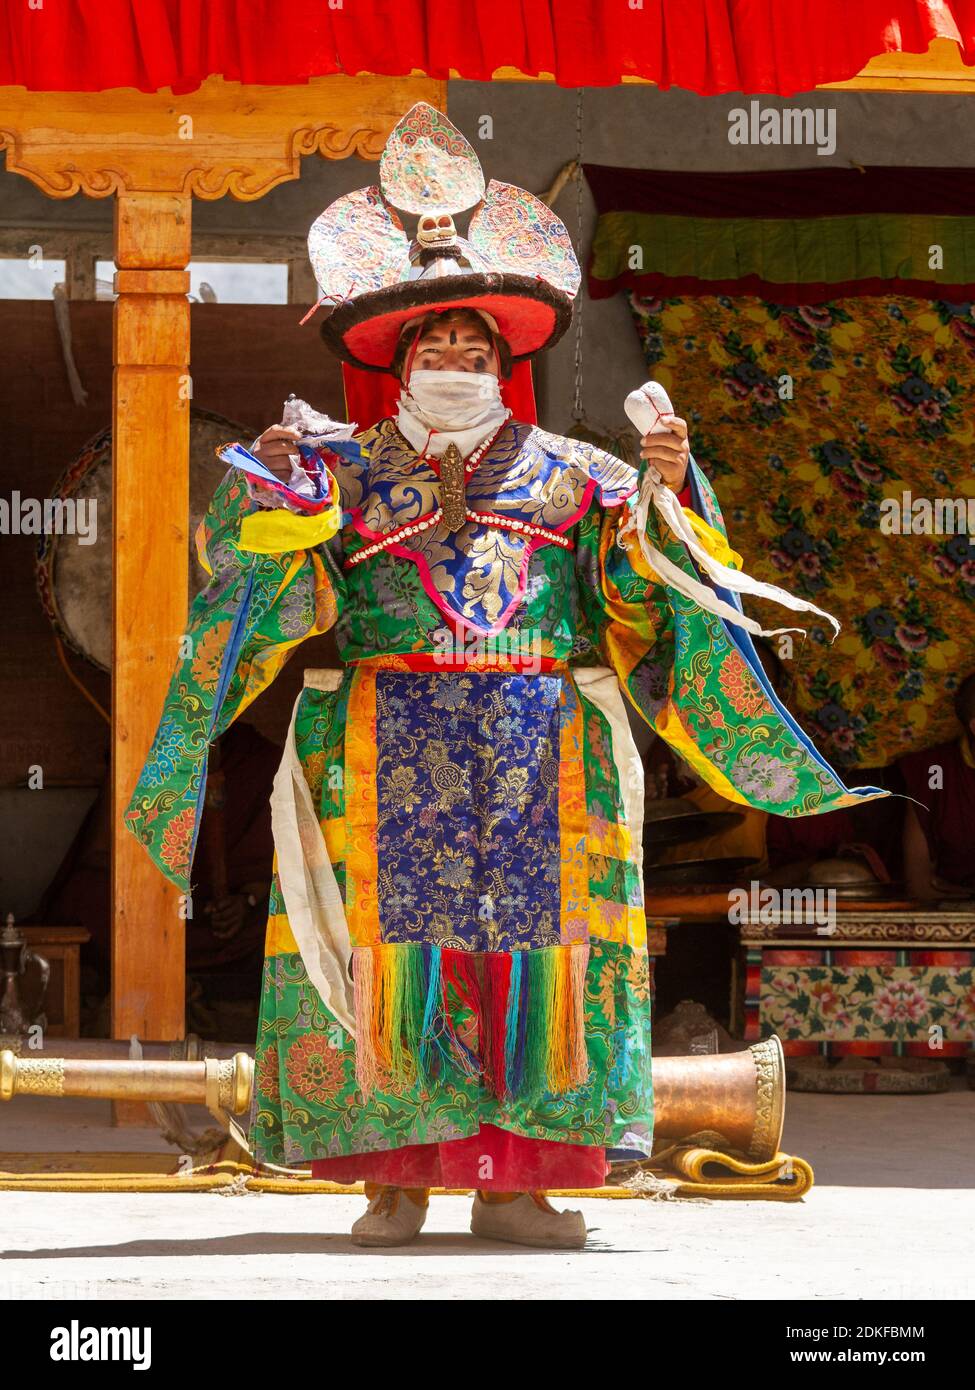 Padum, Zanskar, India - July 17, 2012: Lama in ritual costume and ornate hat performs a historical mystery Black Hat Dance of Tibetan Buddhism on the Stock Photo